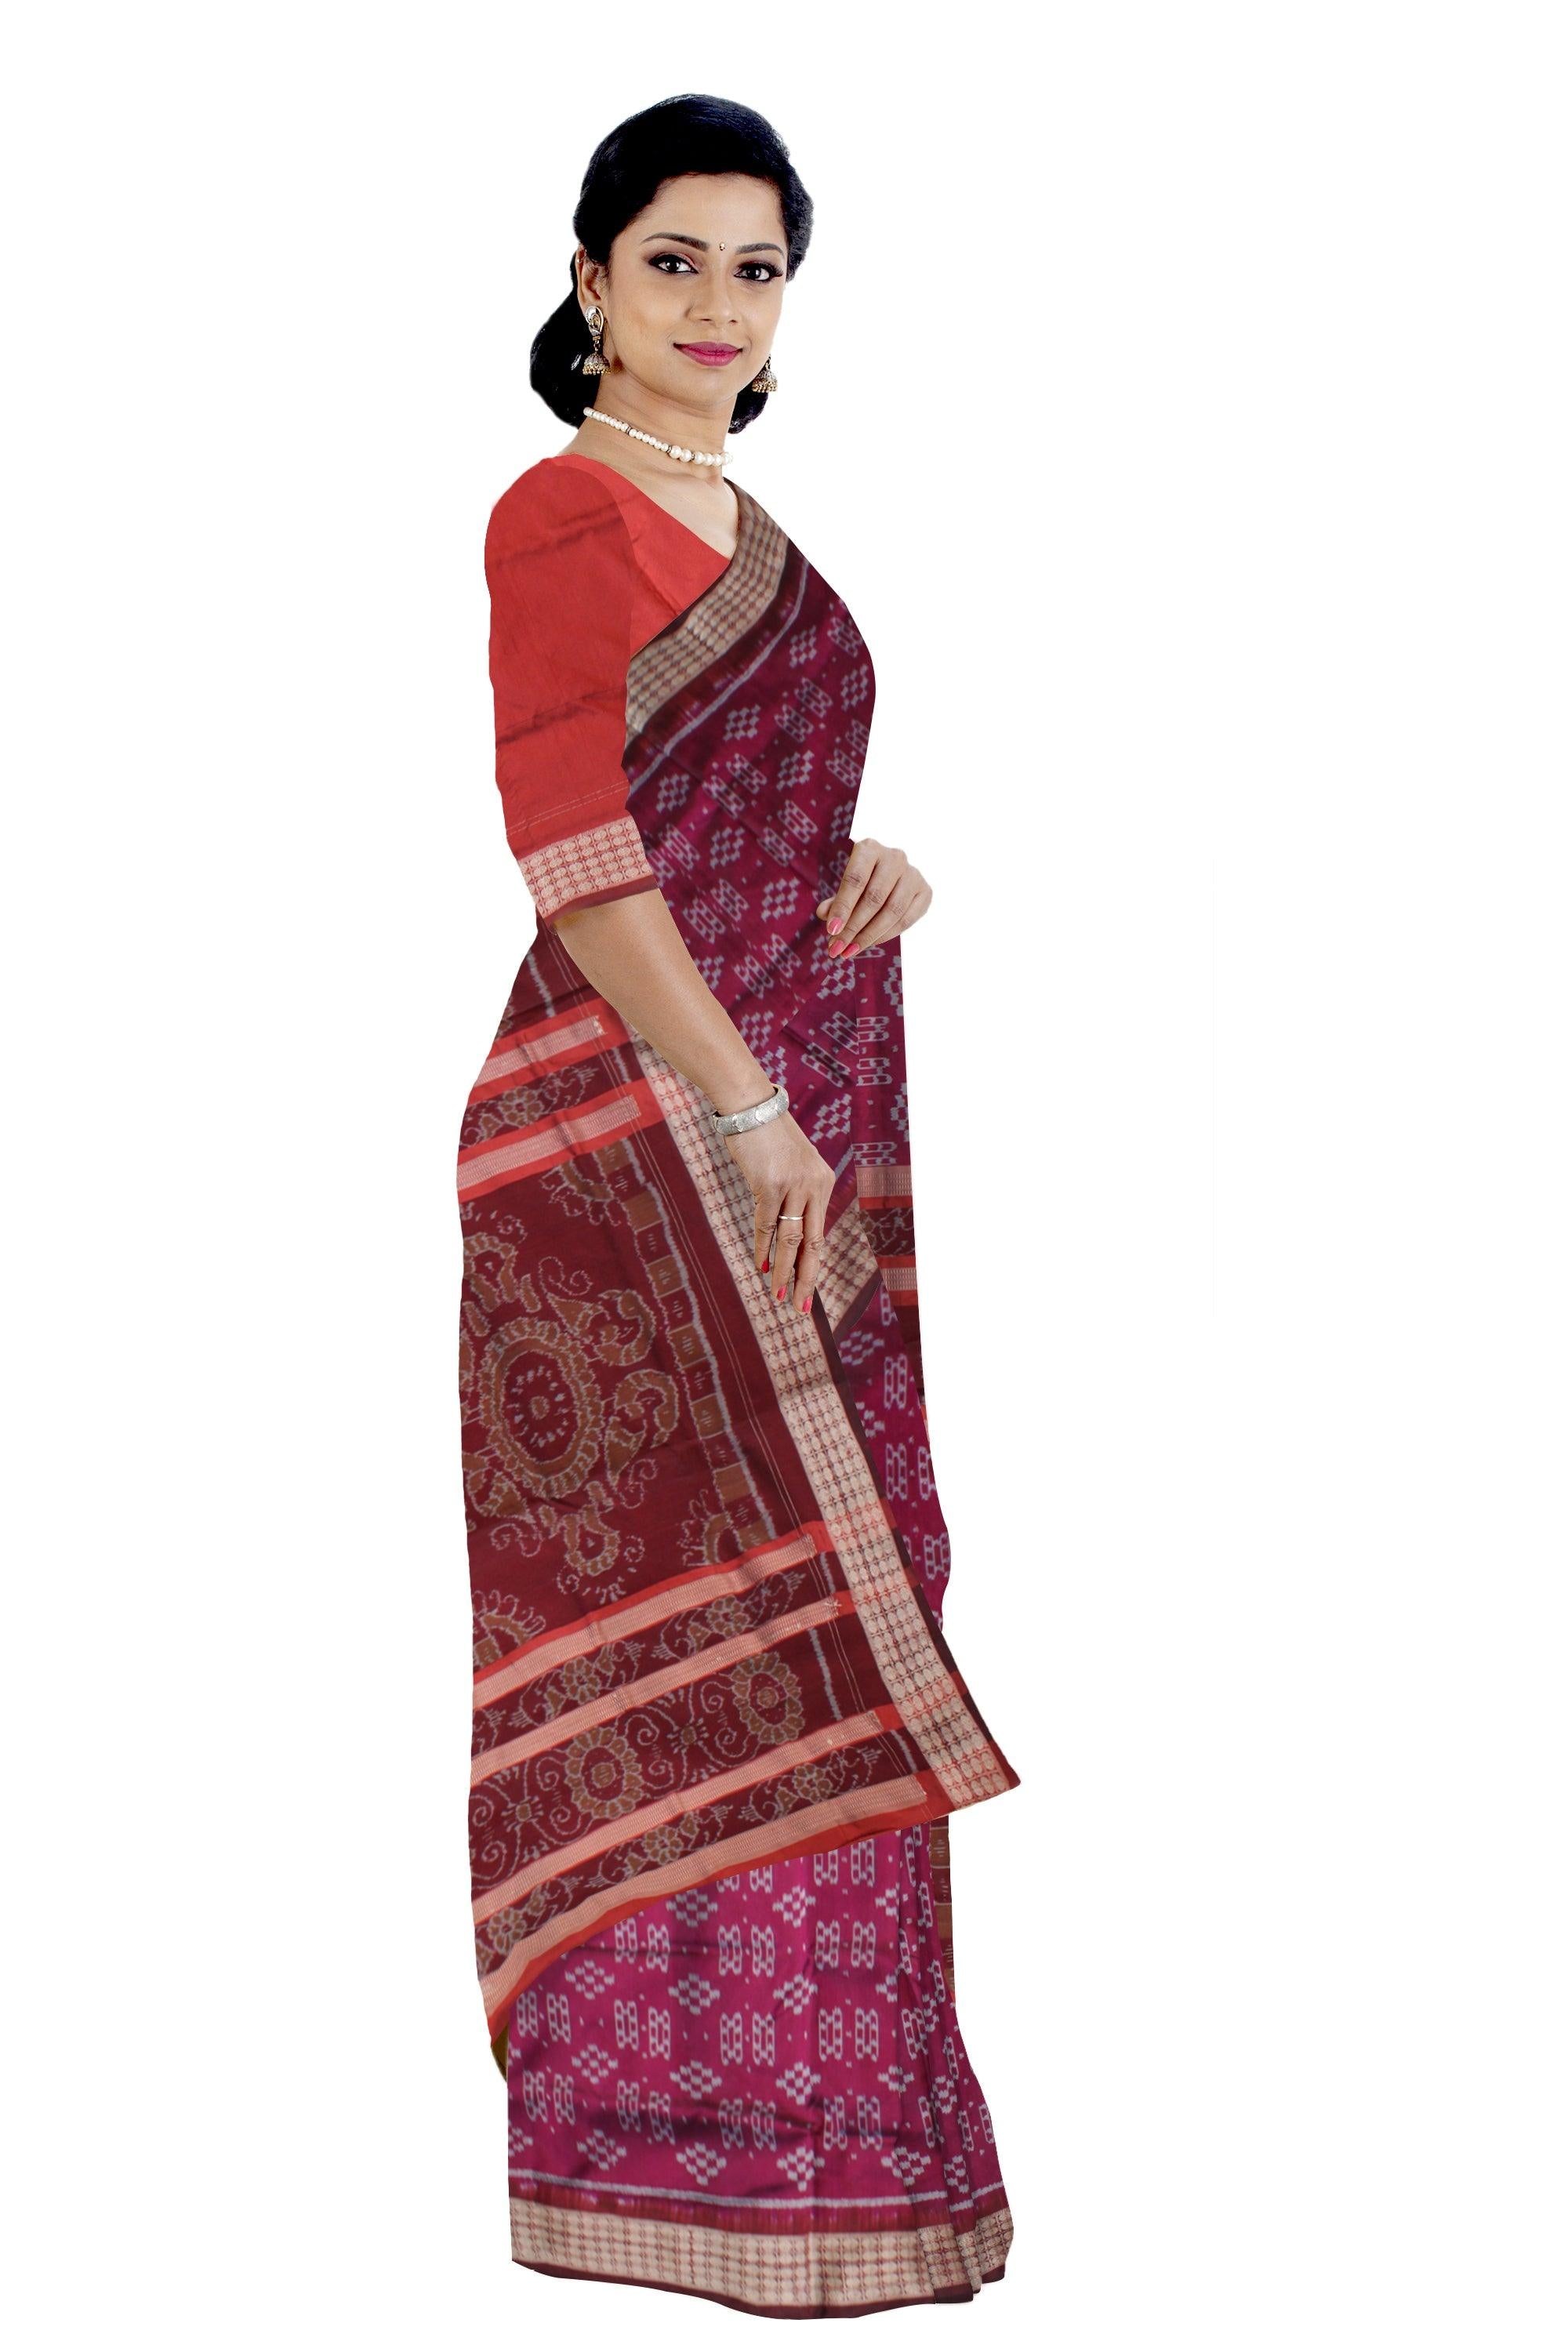 TRADITIONAL PASAPALI PATTERN PATA SAREE IS DARK-PINK AND MAROON COLOR BASE,COMES WITH MATCHING BLOUSE PIECE. - Koshali Arts & Crafts Enterprise